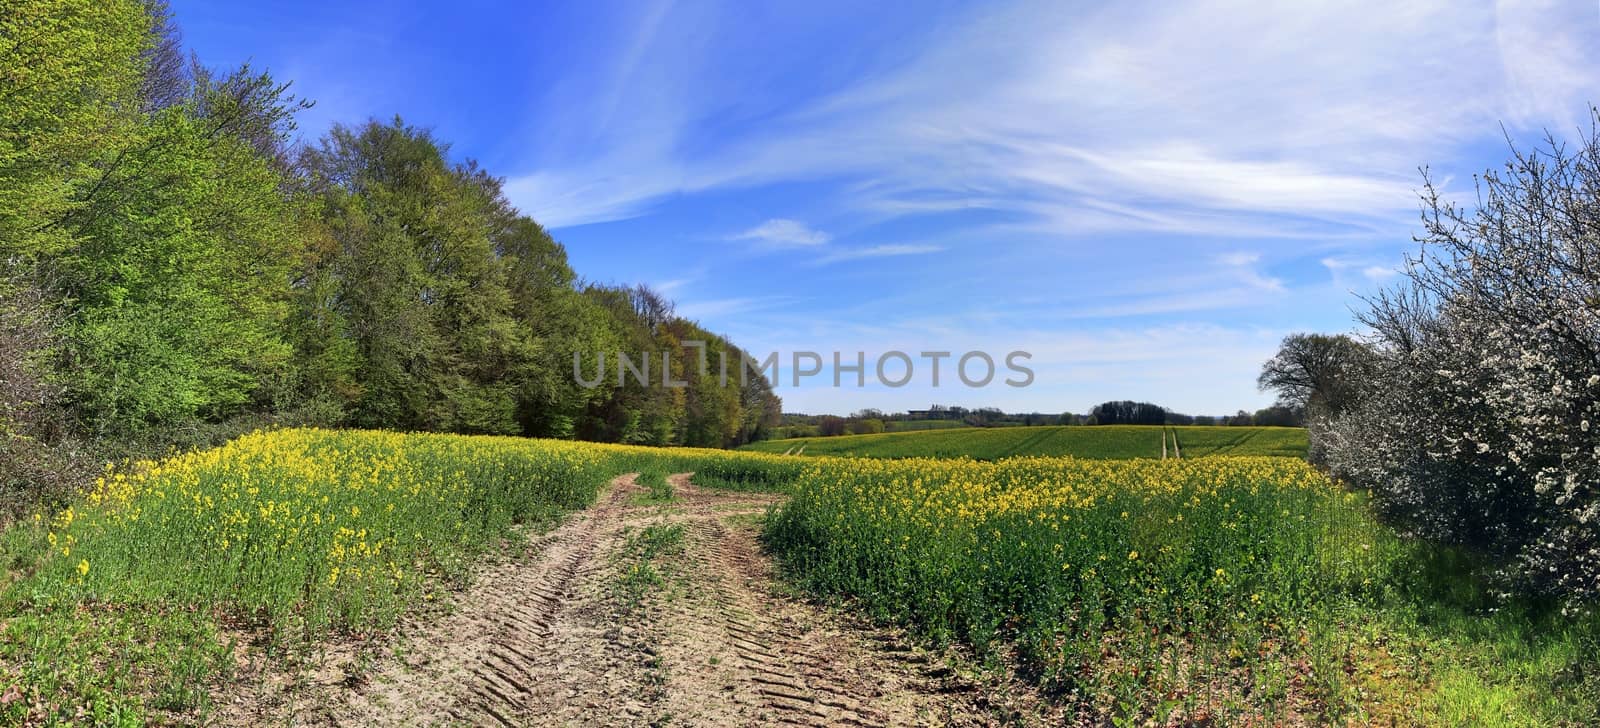 Beautiful high resolution panorama of a northern european countr by MP_foto71